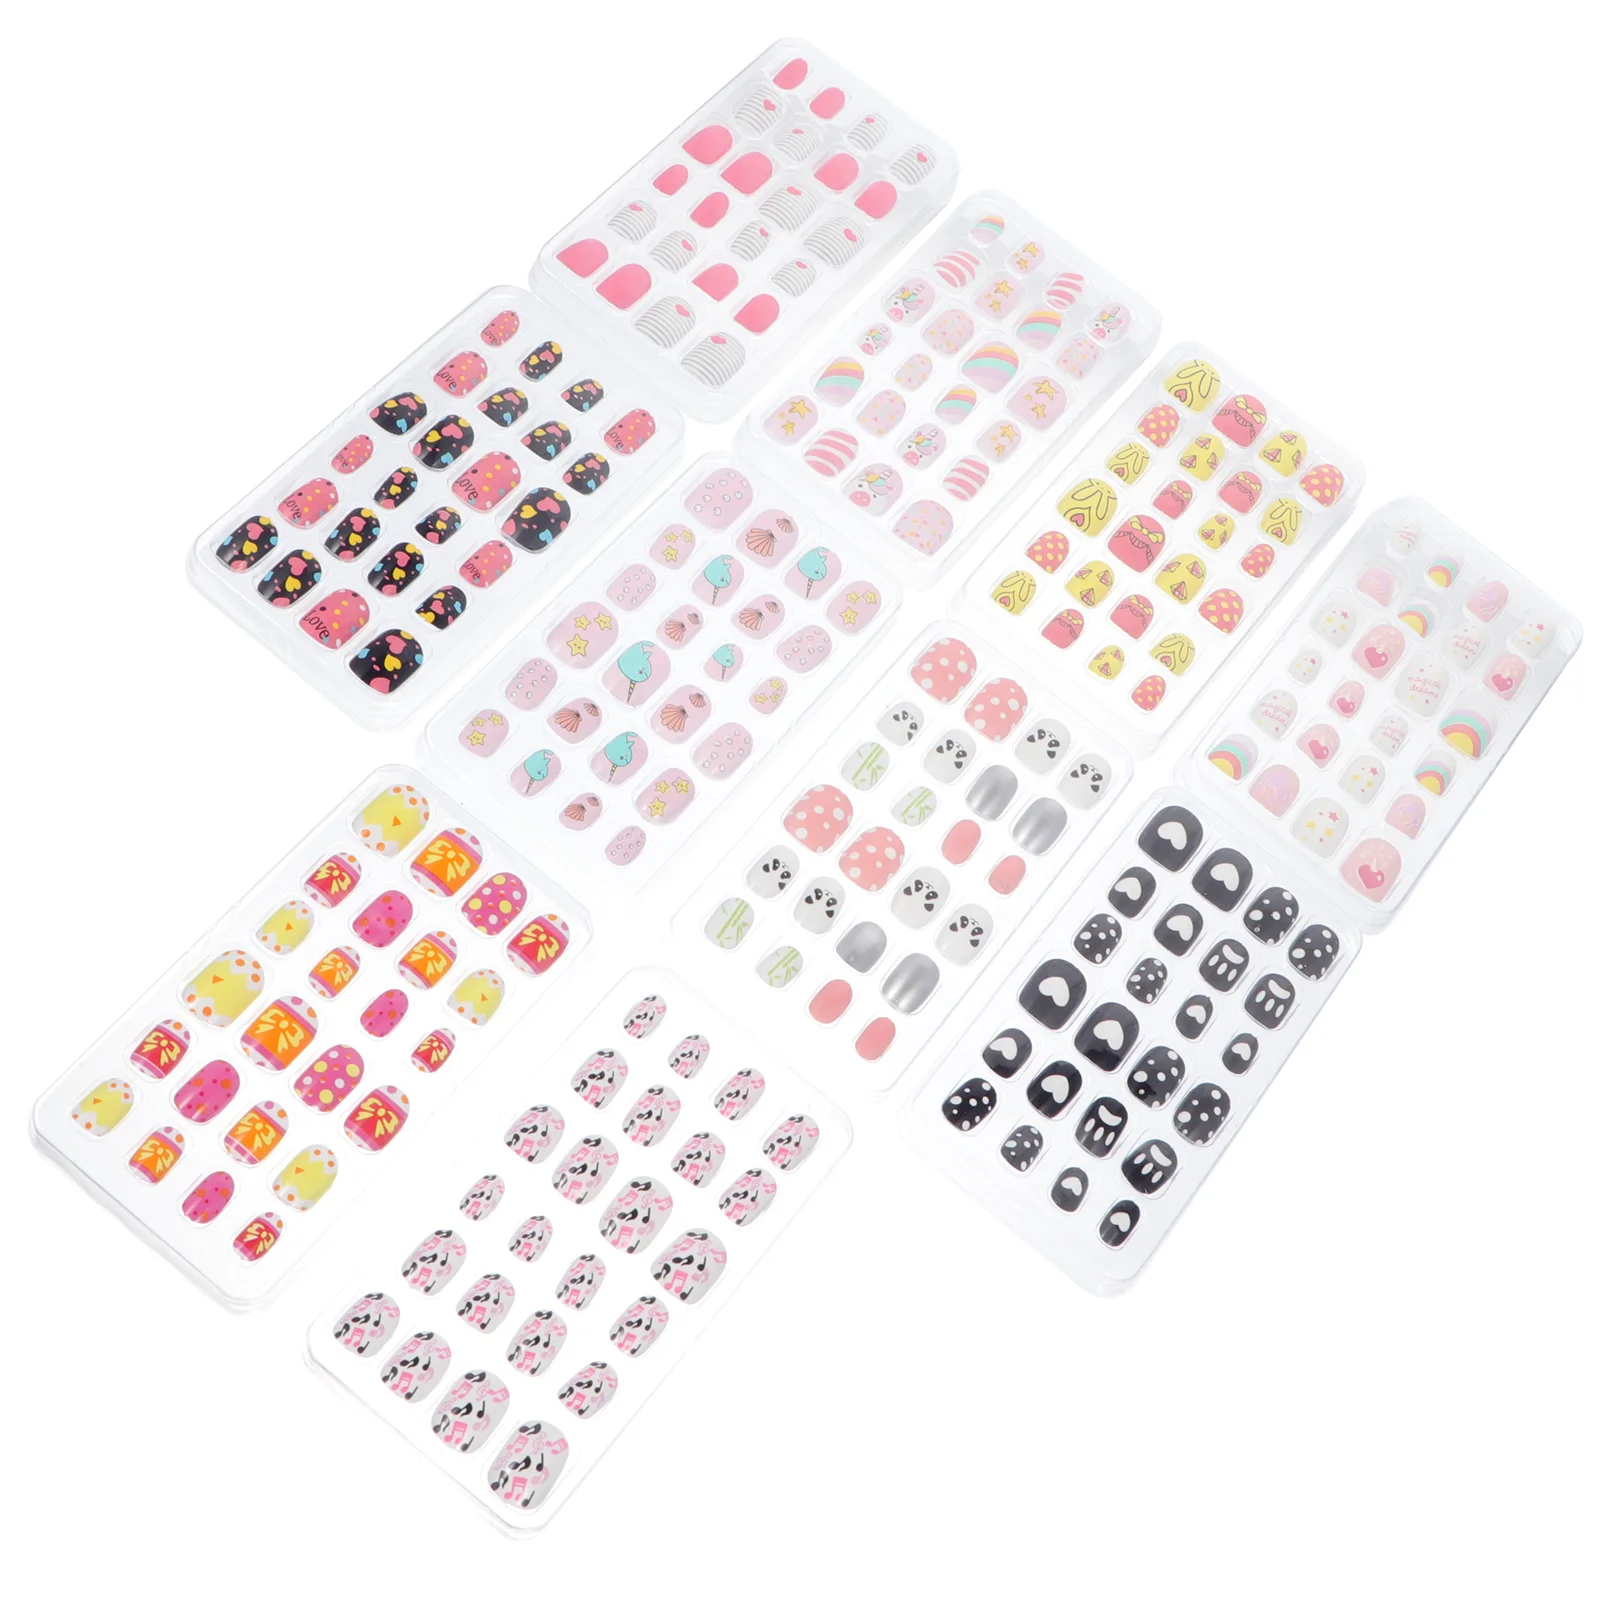 

240 Pcs/ Children's False Nails Stickers for Girls Finished Product ABS Environmental Protection Material Kids Fake